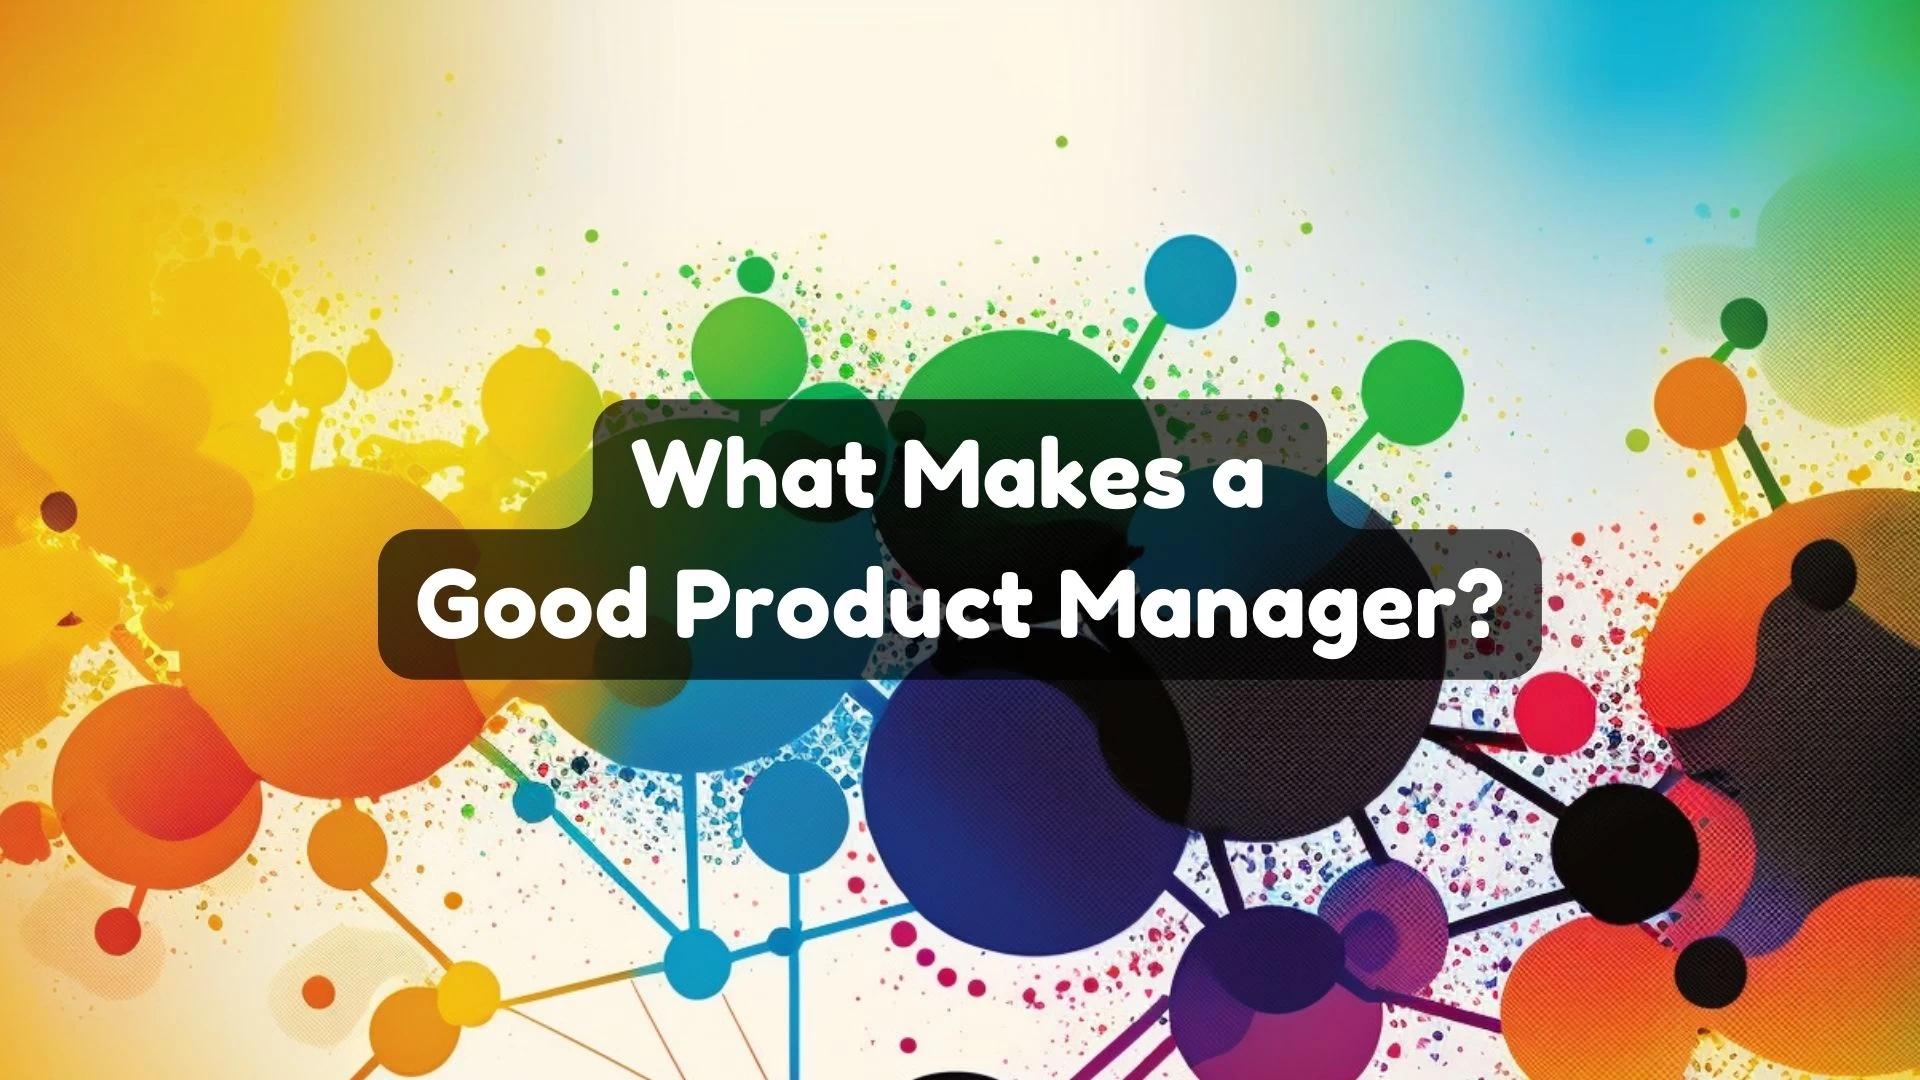 What makes a good product manager?